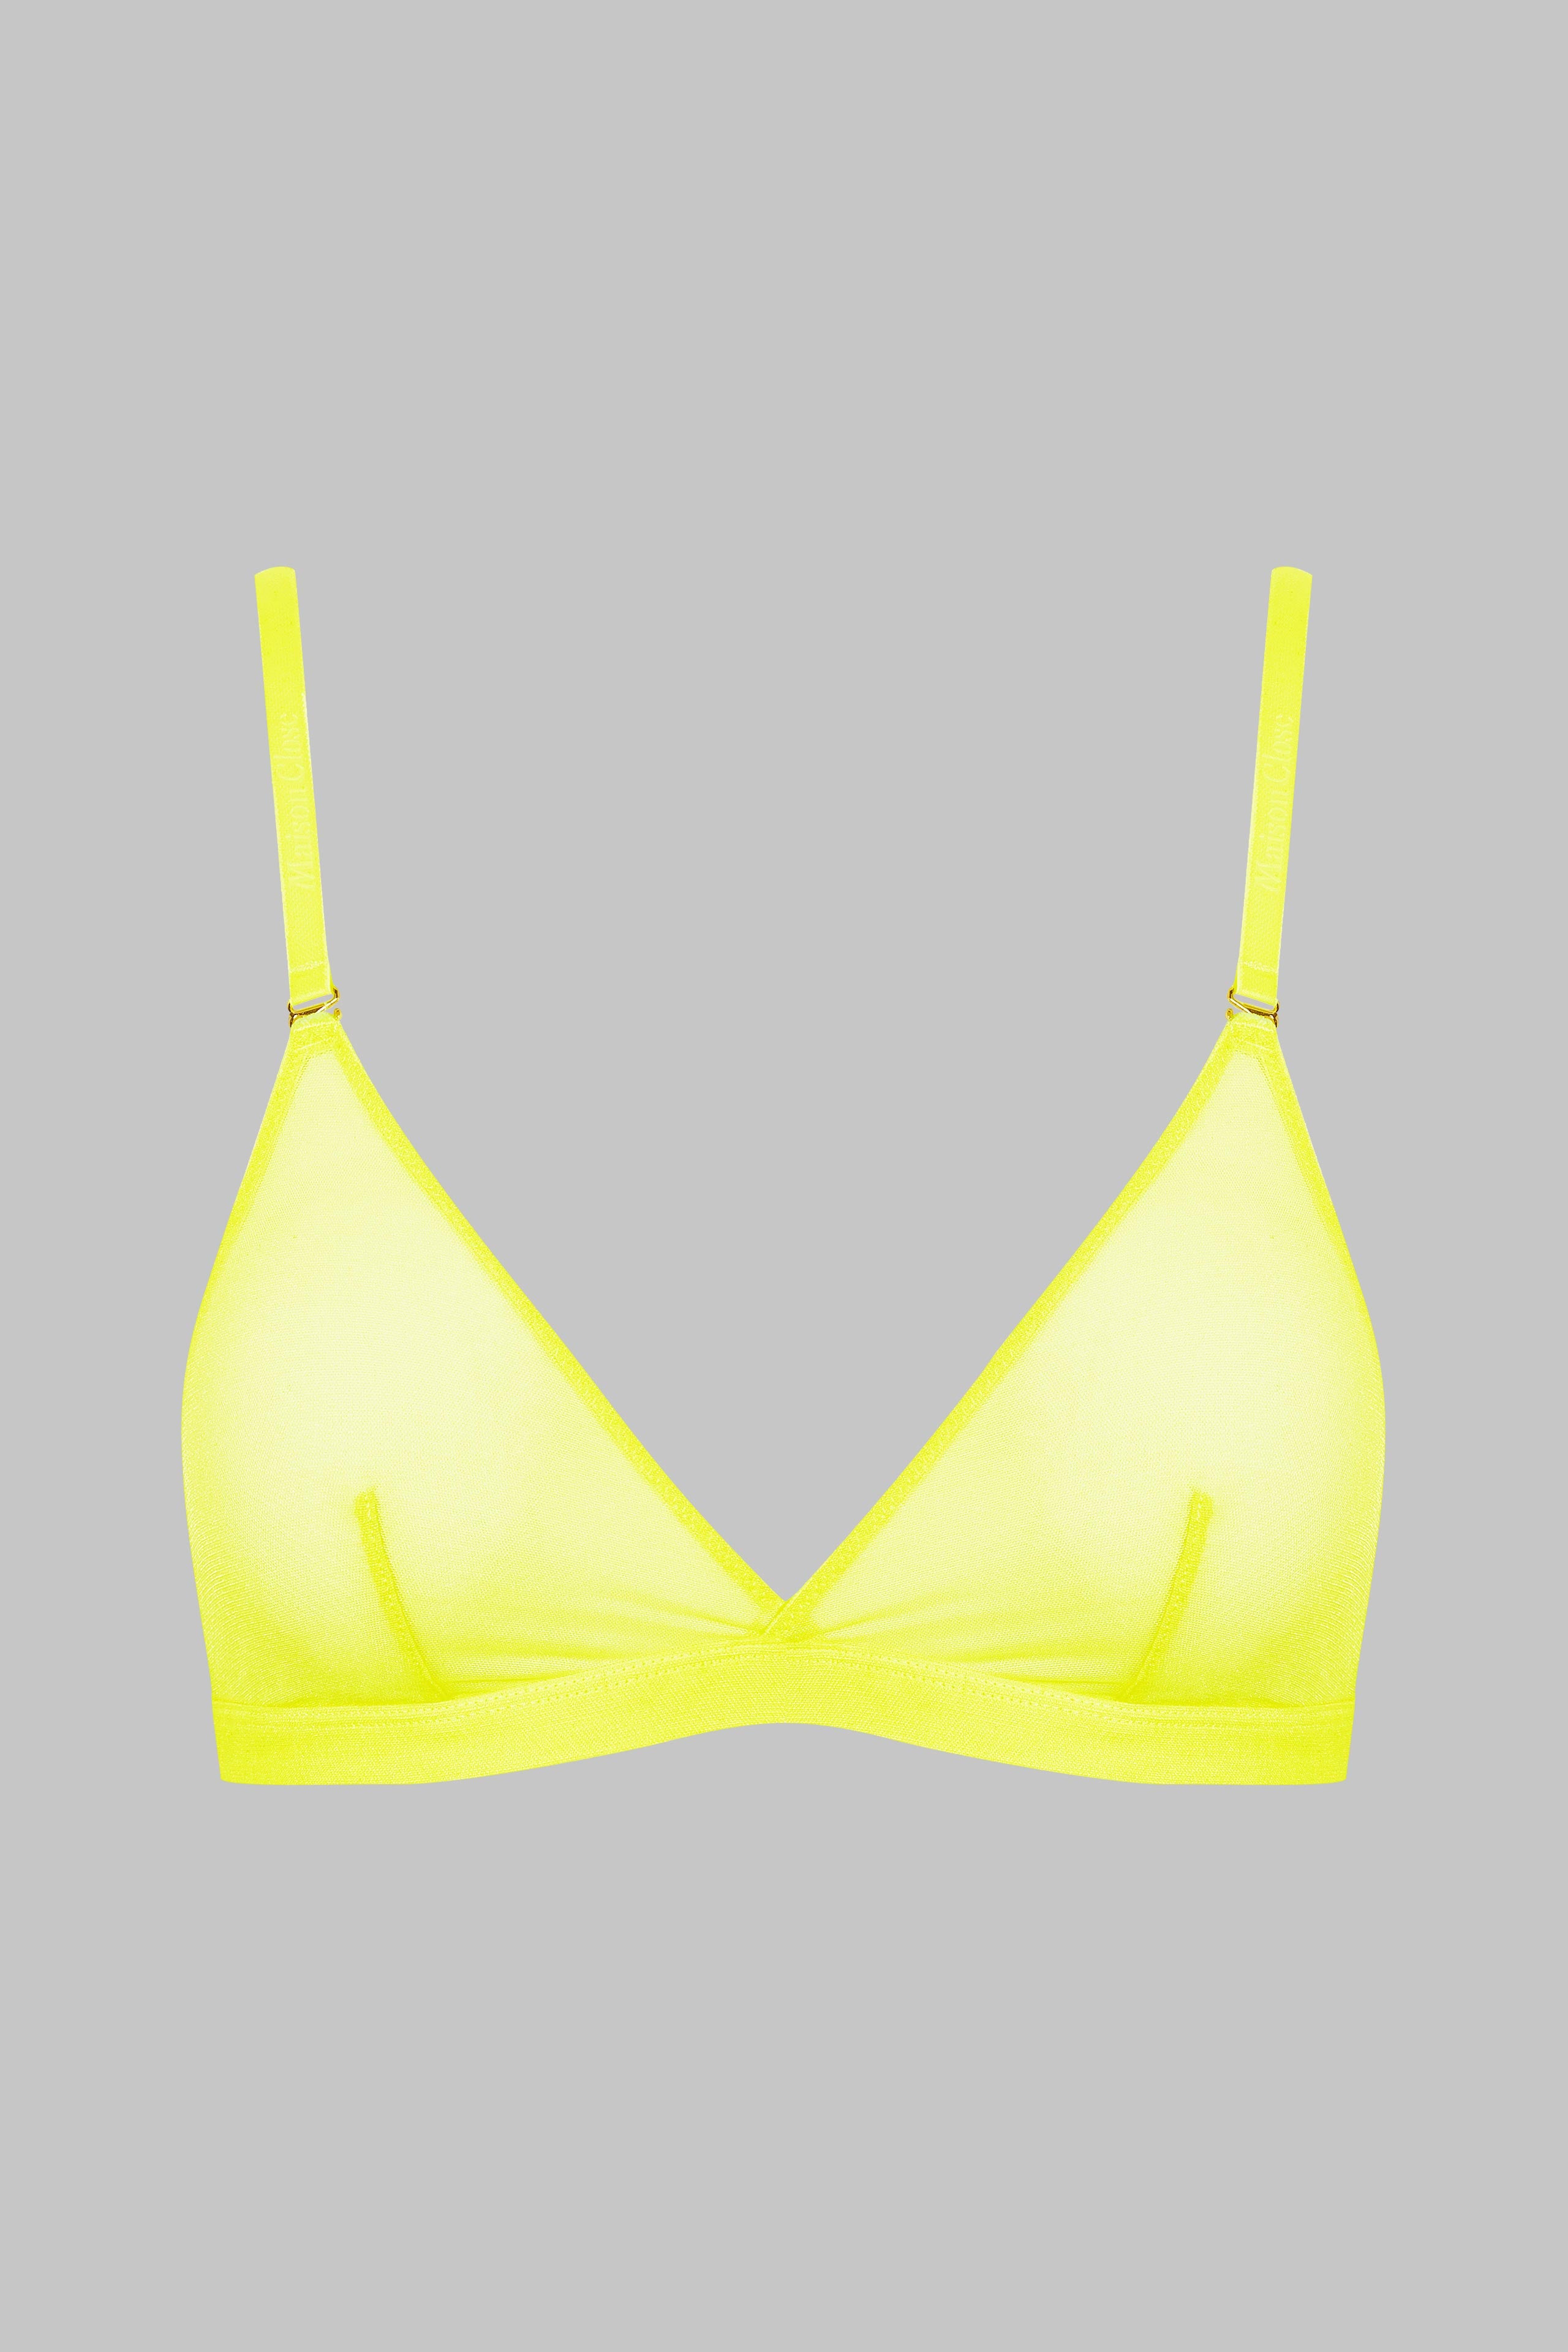 New BCBGeneration Womens The Count on Me Crop Bra, Transparent Yellow, Large